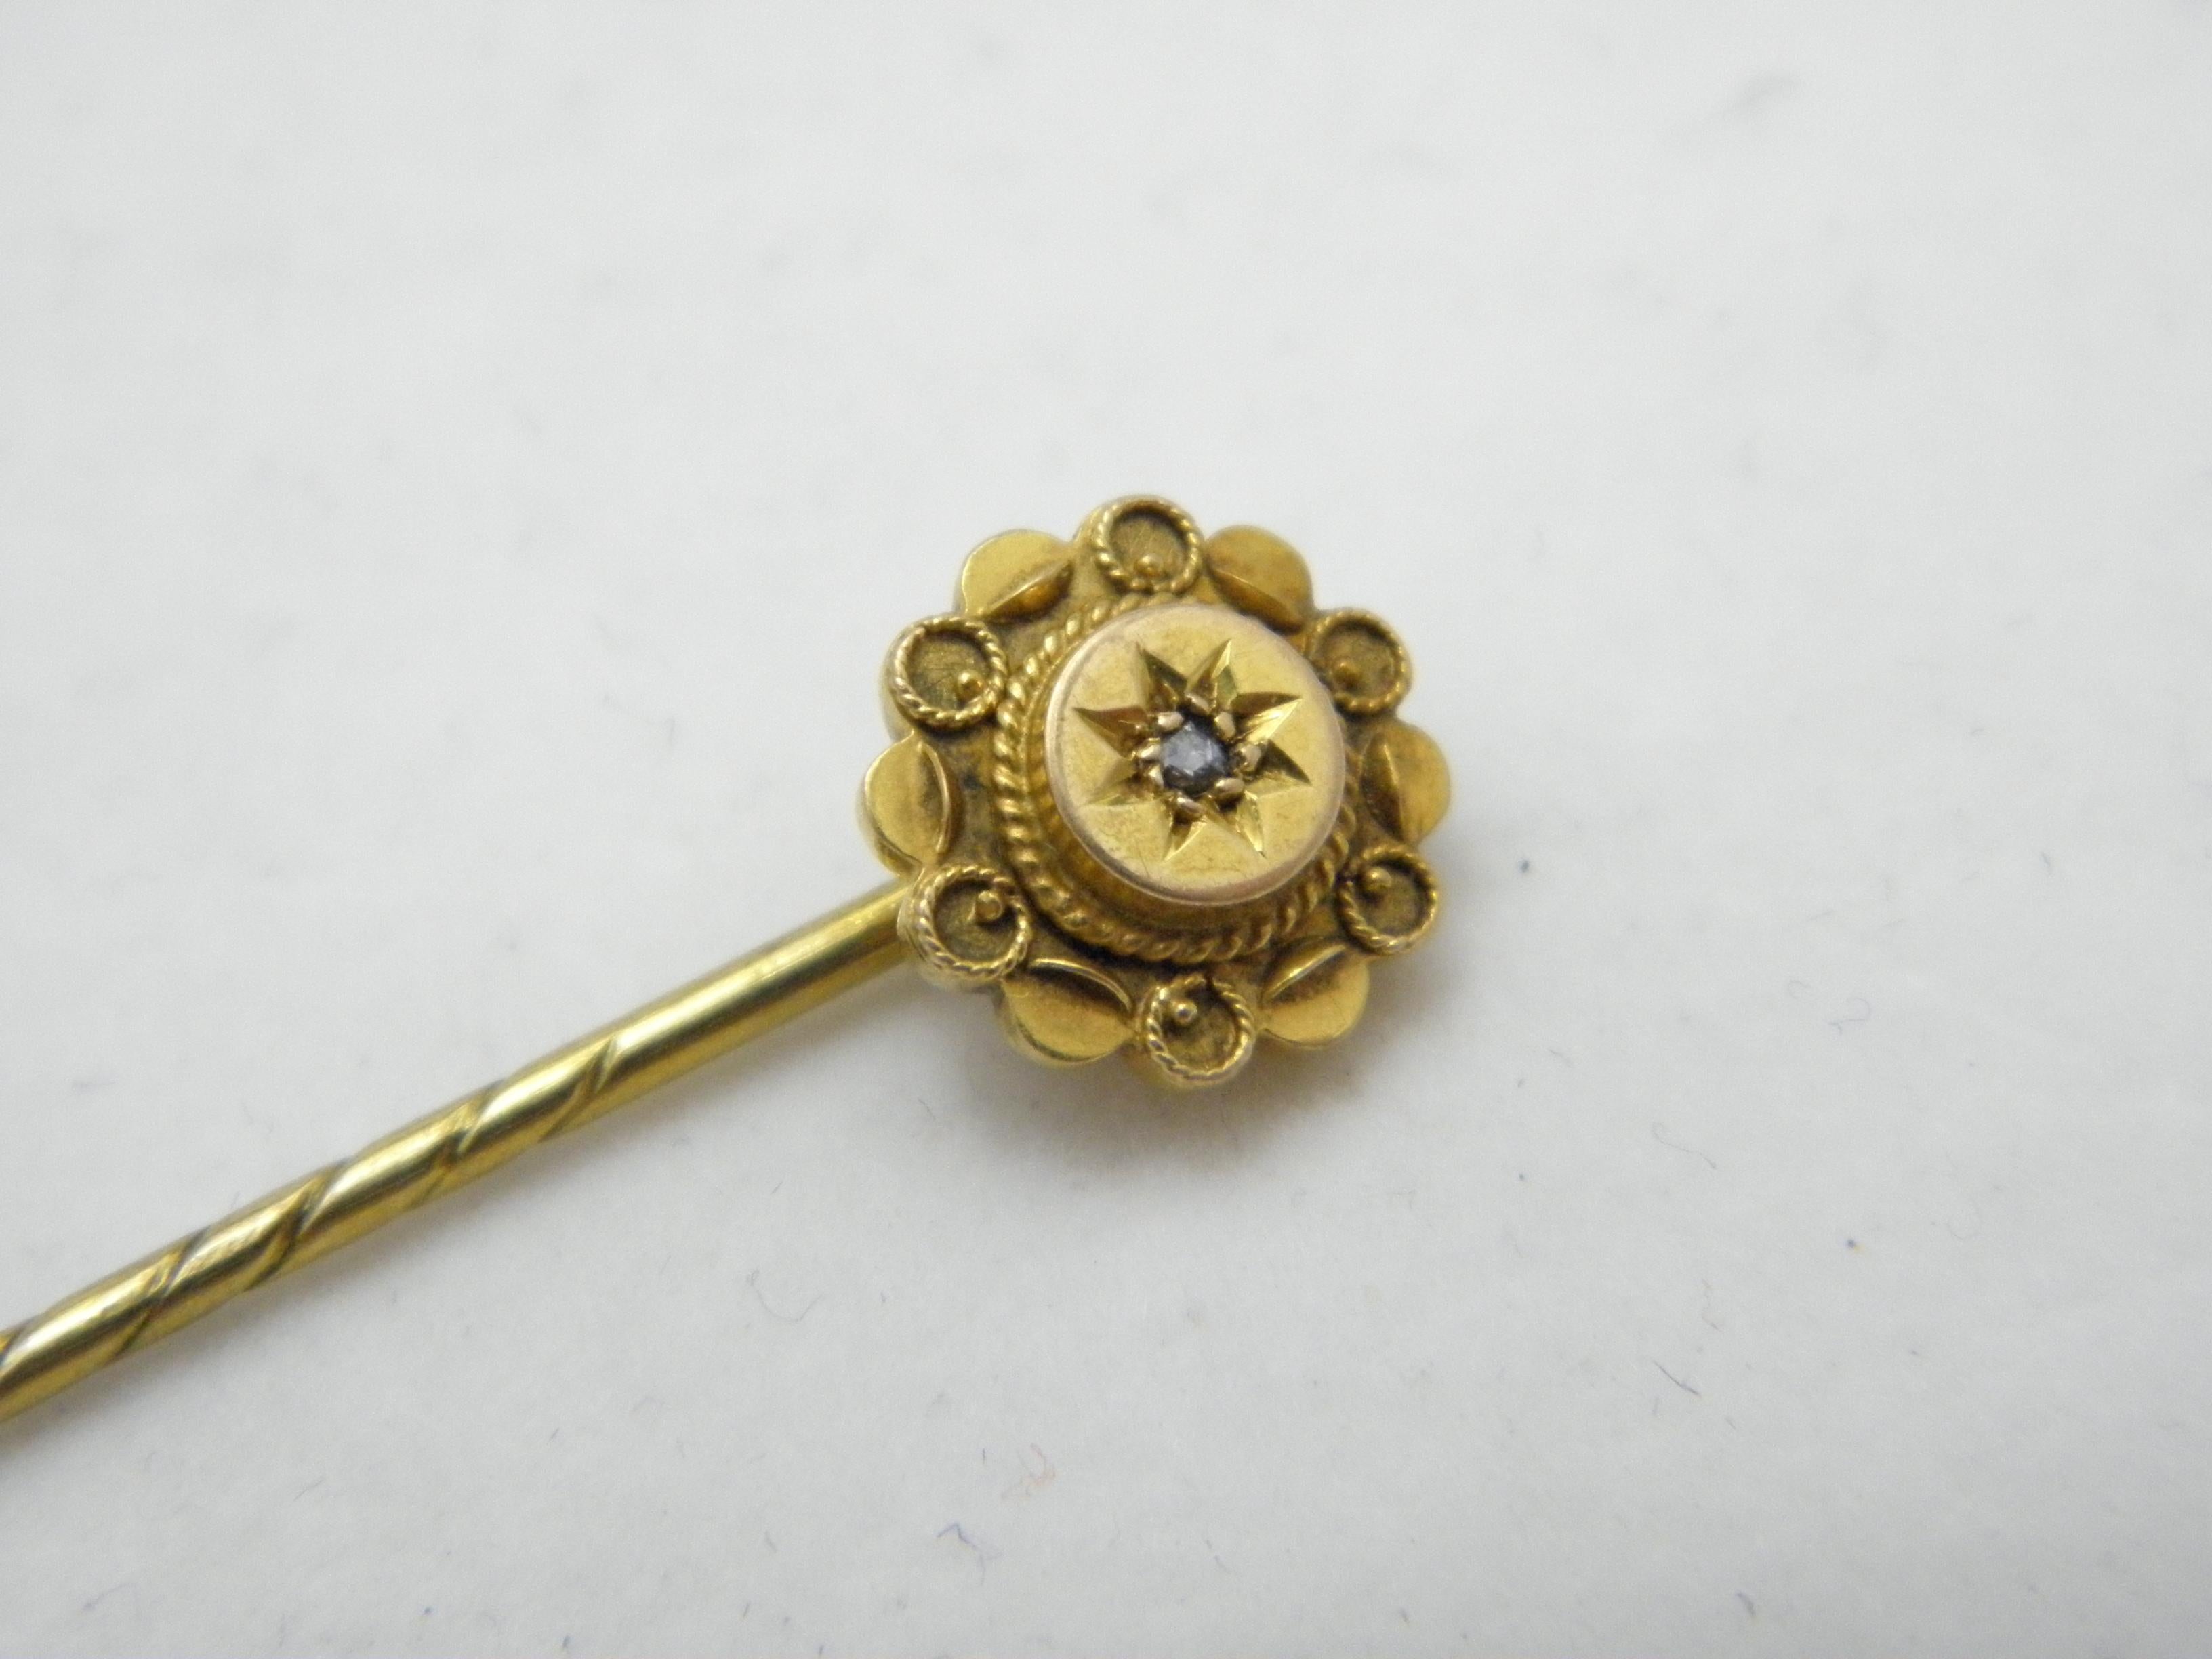 Victorian Antique 15ct Gold Diamond Stock Pin Brooch c1880 Heavy 625 Purity Tie Lapel Hat For Sale